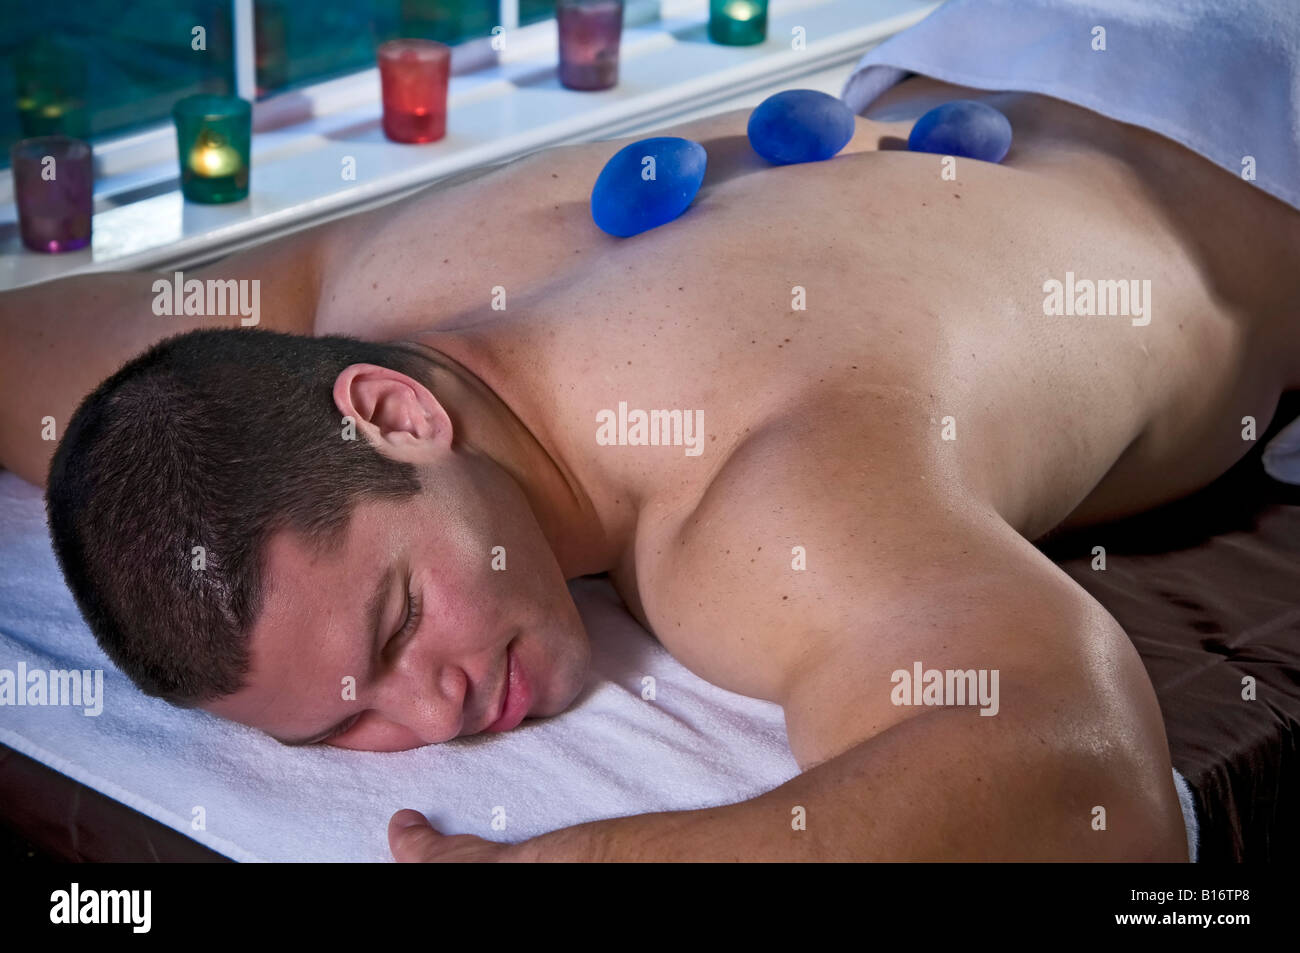 A very muscular man lying face down on a massage table. Stock Photo